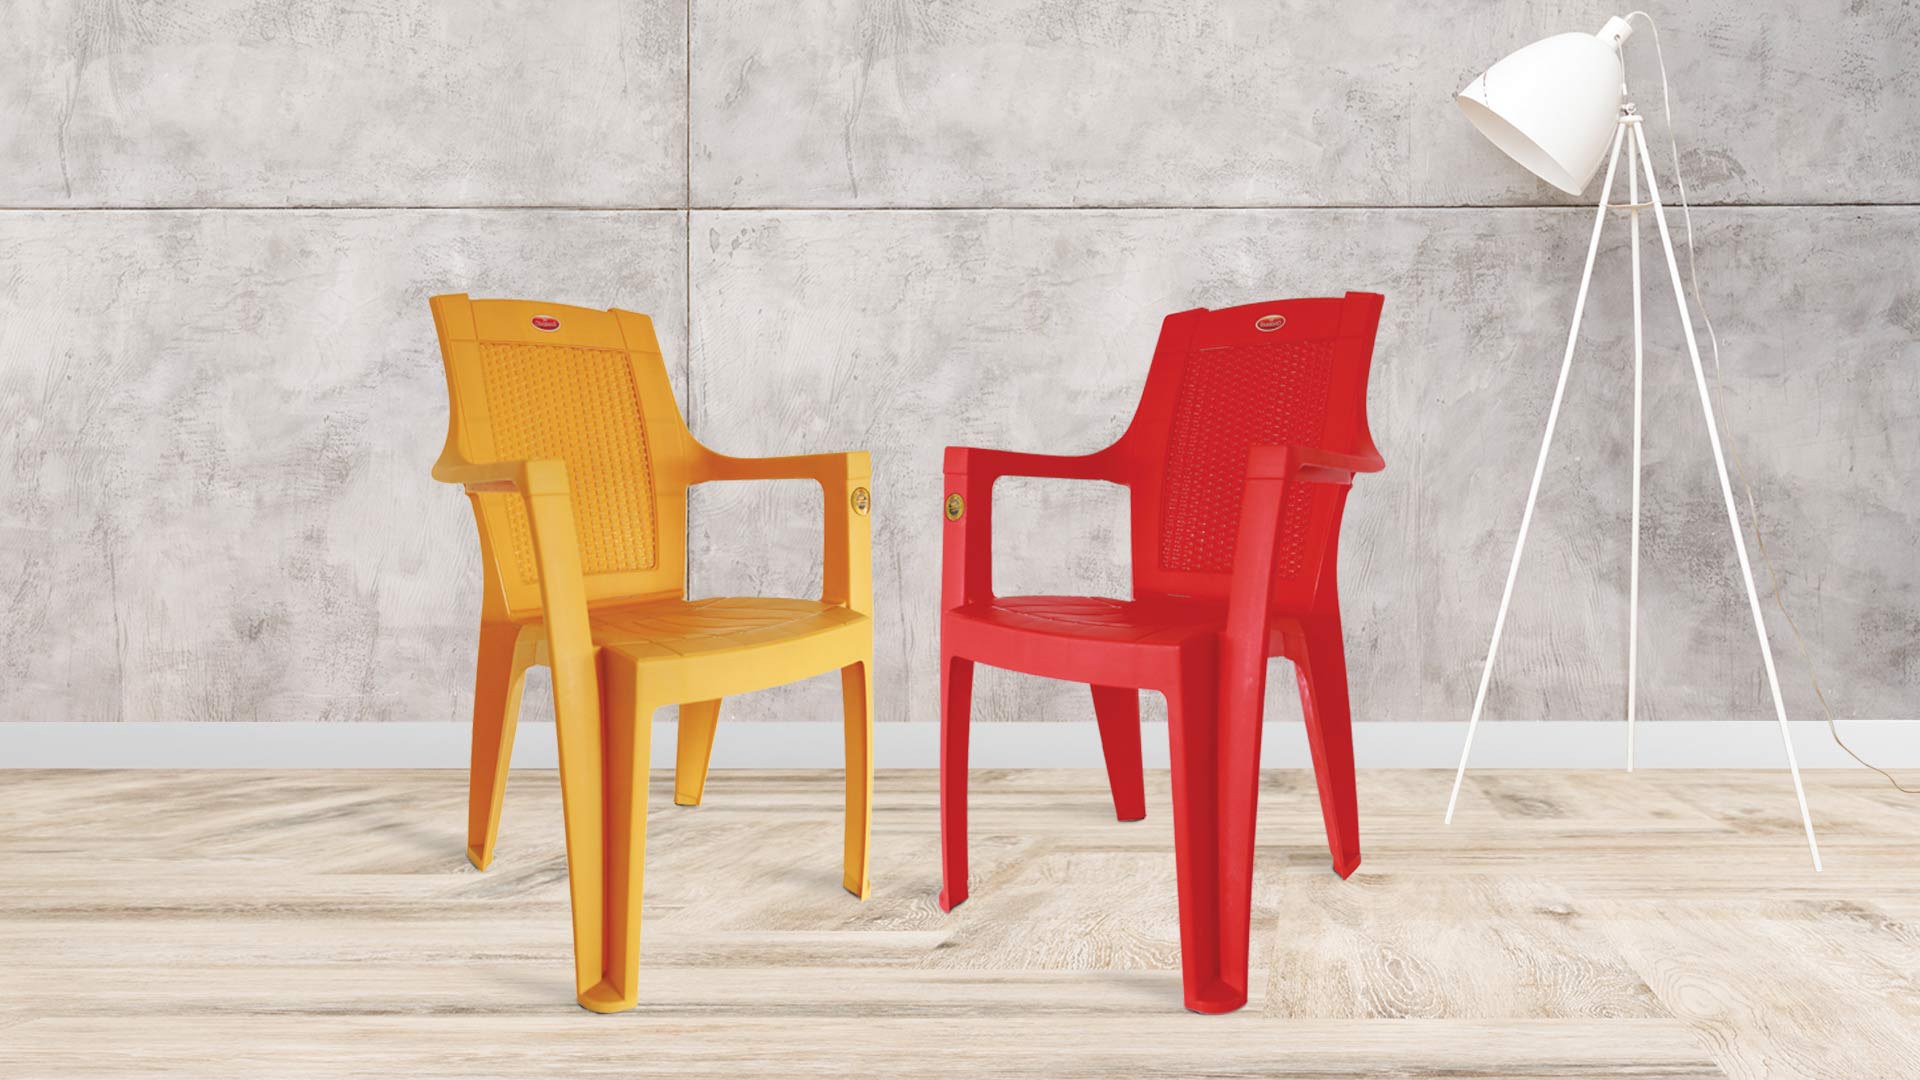 All Types of Plastic Chairs Pepperfry Offers